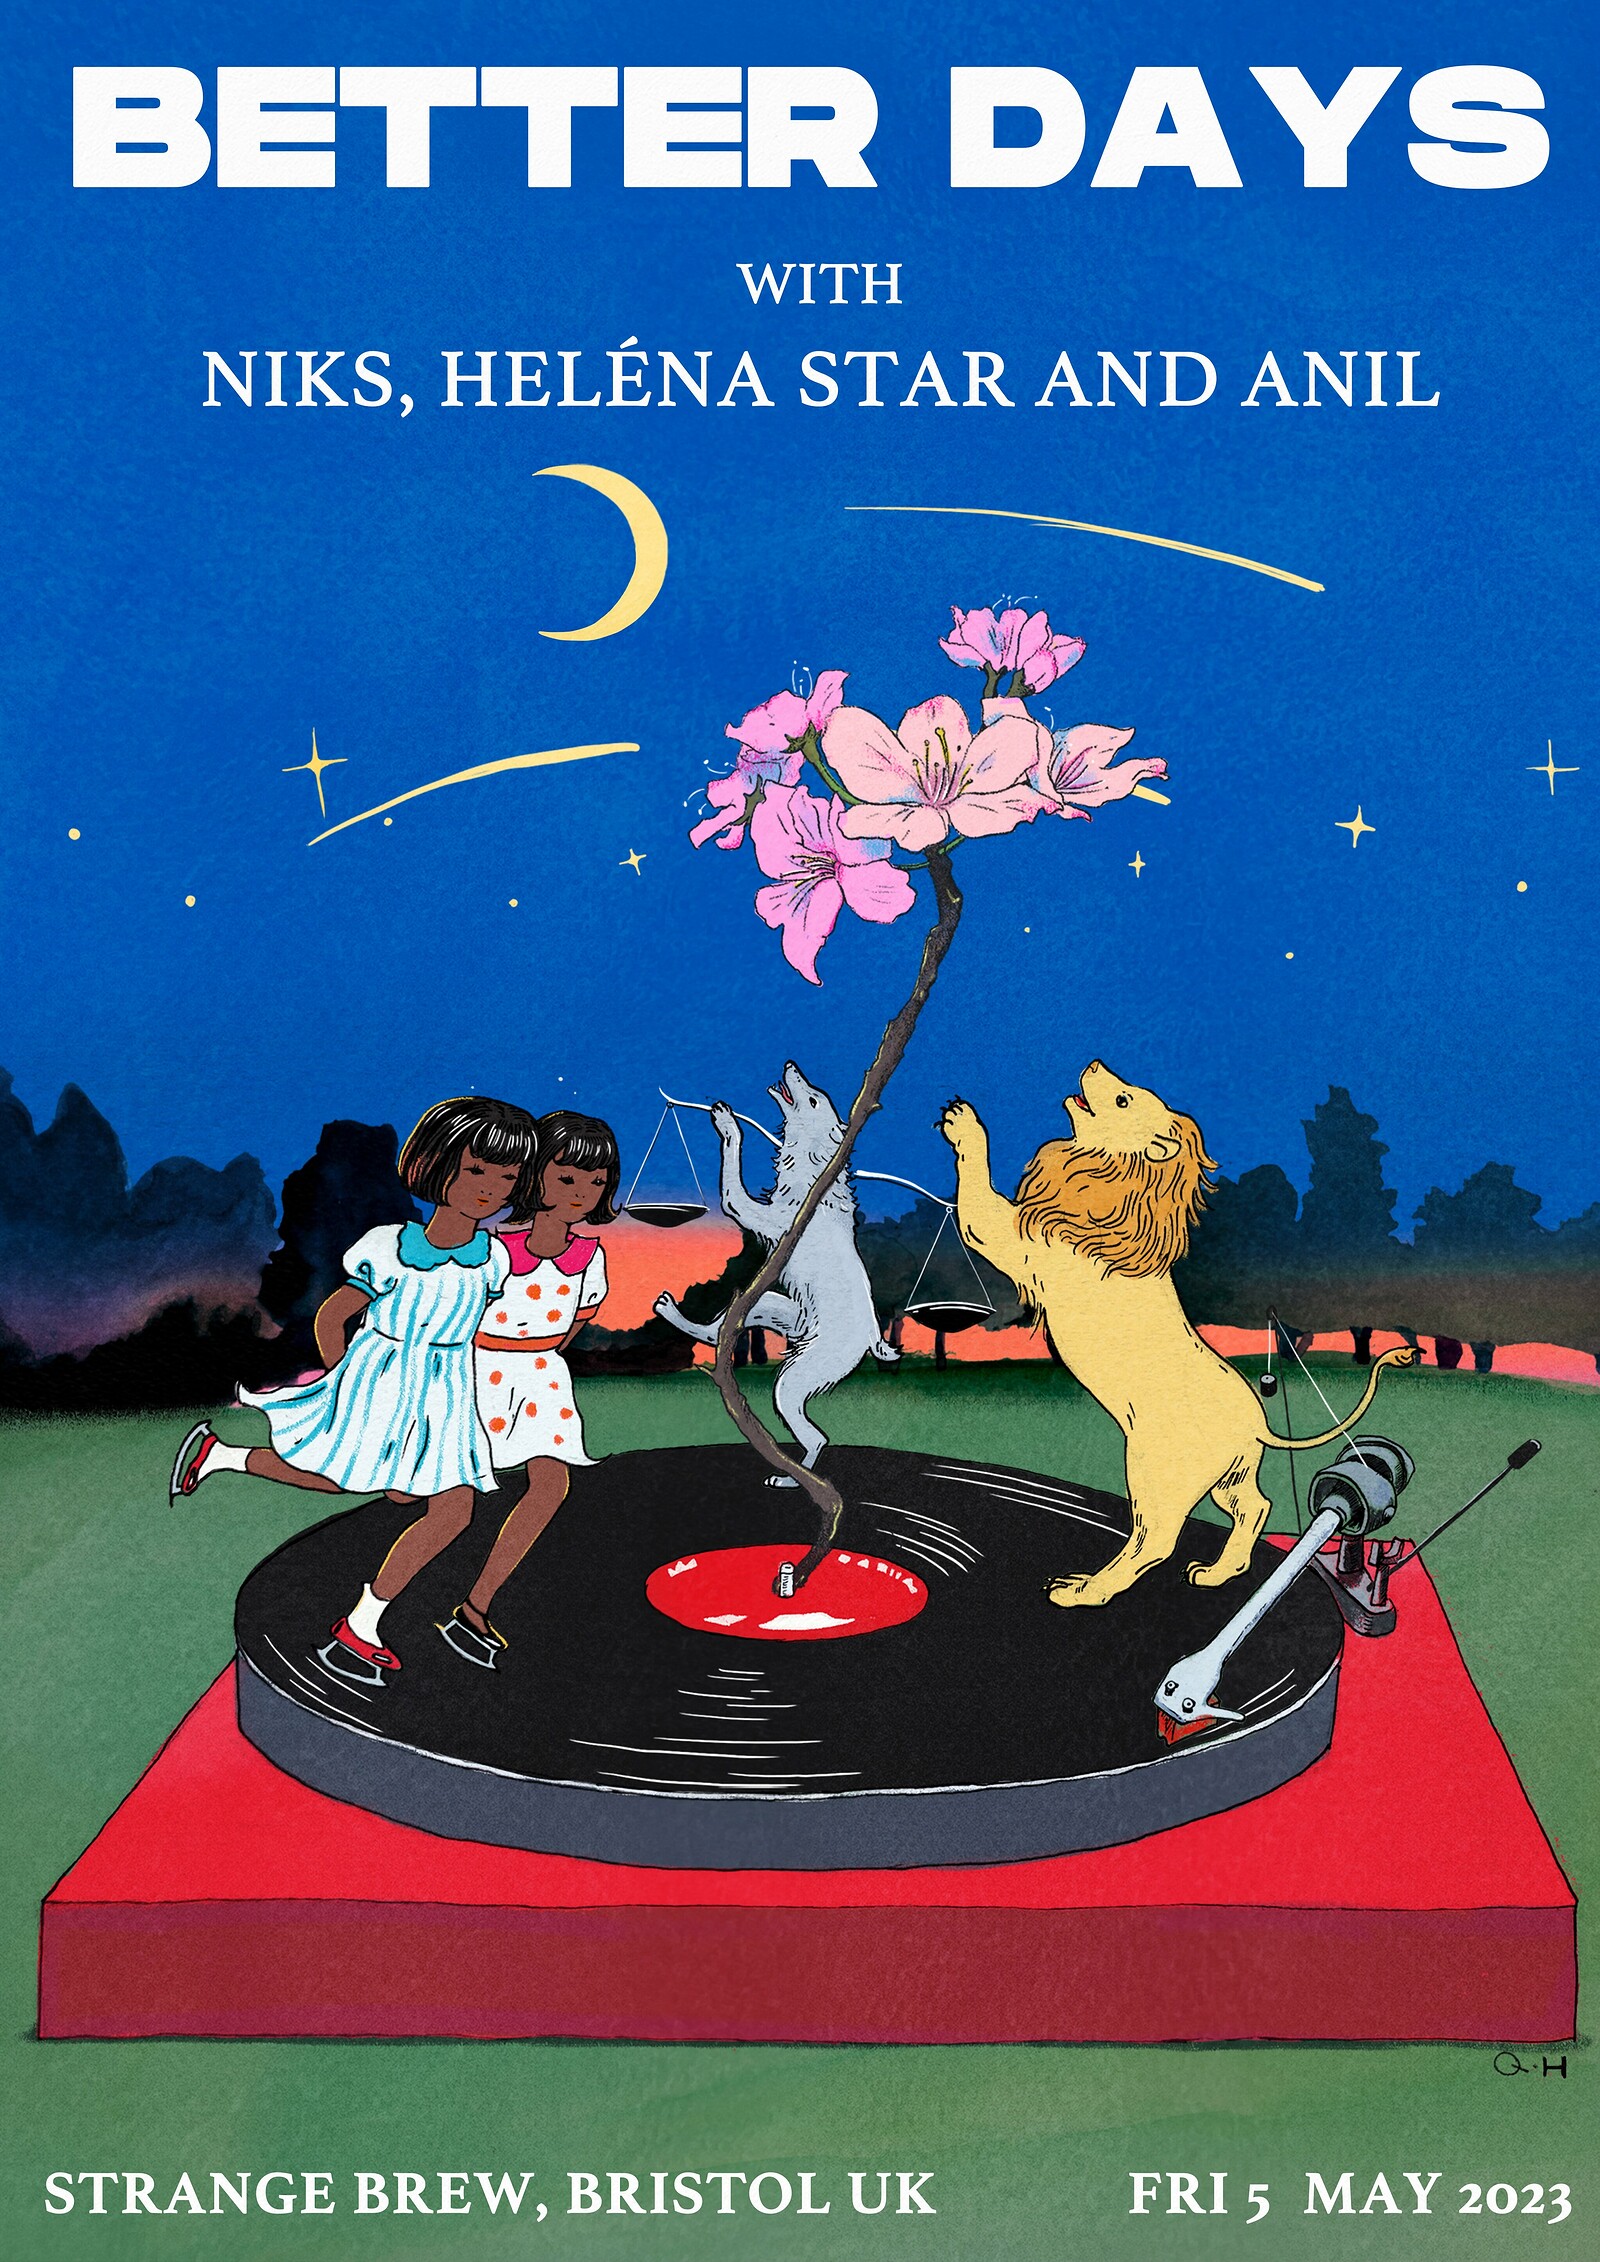 Better Days with NIKS, Heléna Star and Anil tickets — £13.35